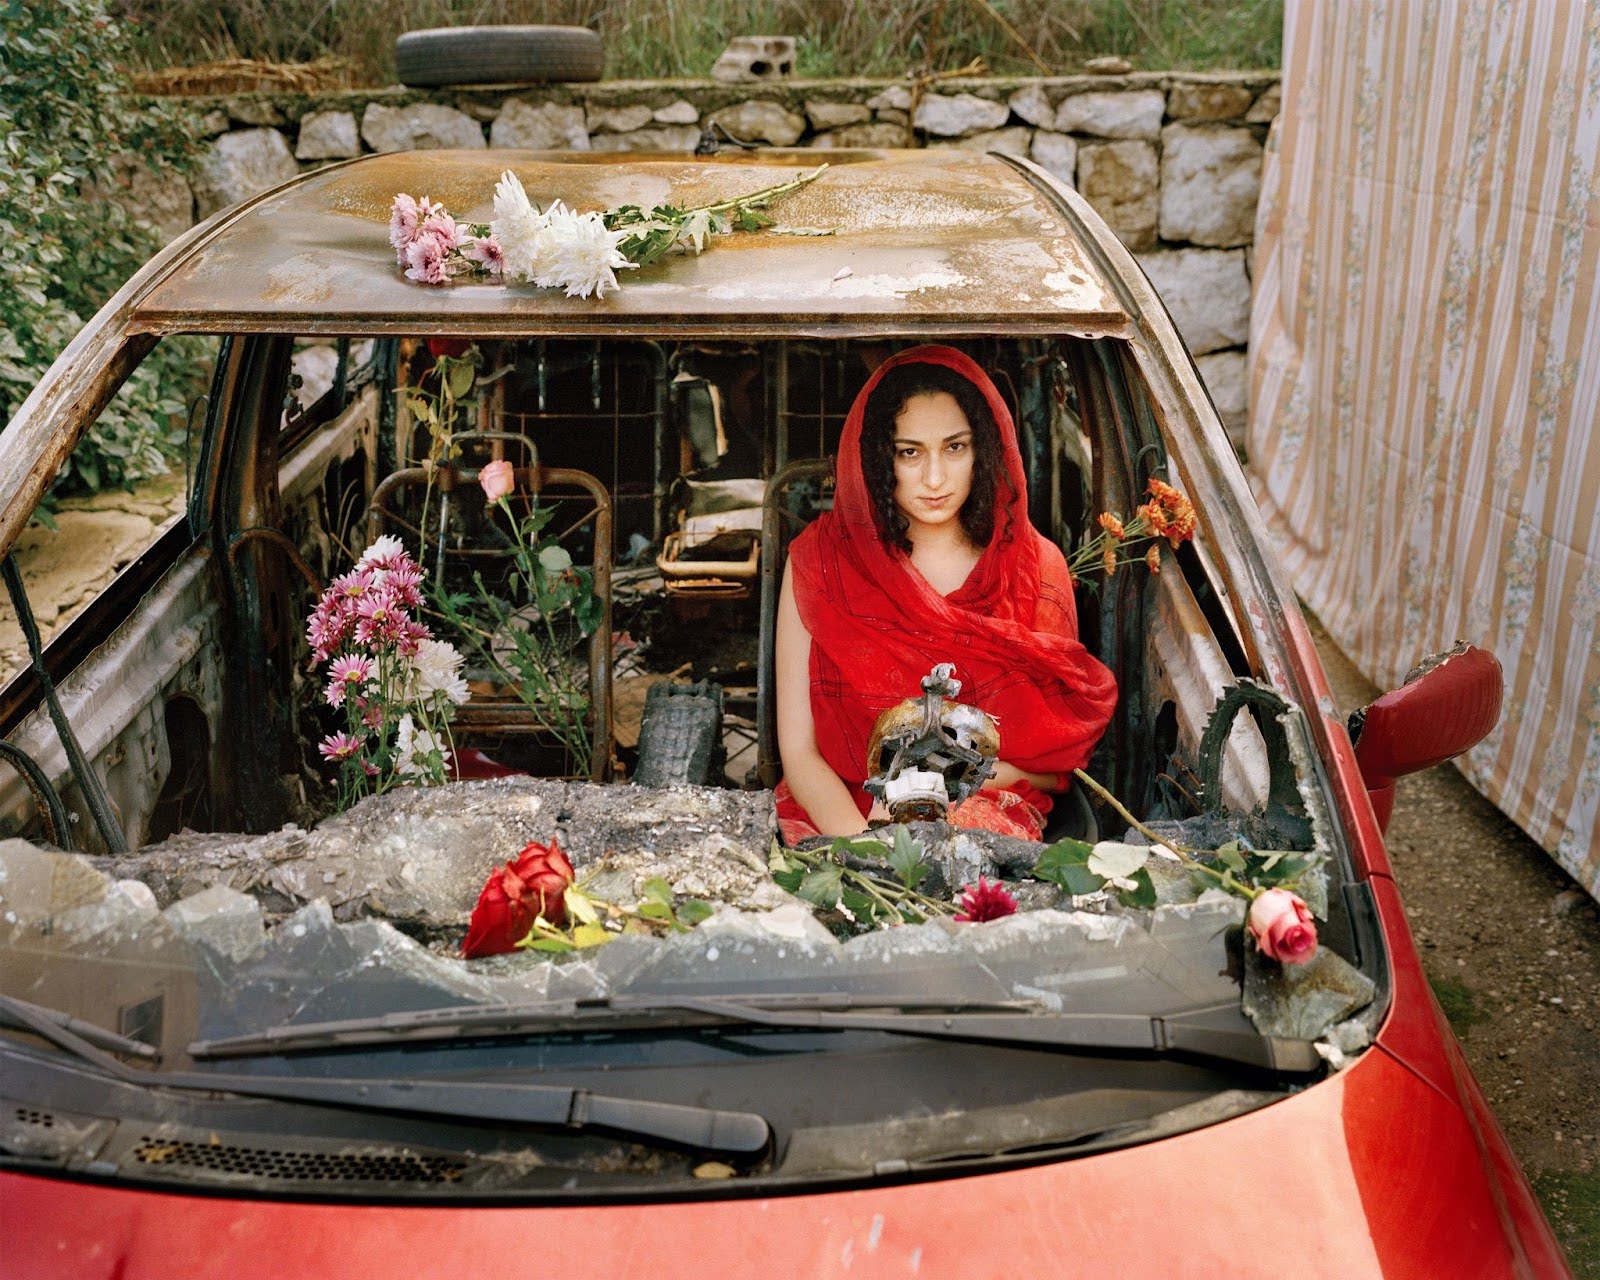 Farah (2020), from the series 50 Years Later, Courtesy of Rania Matar